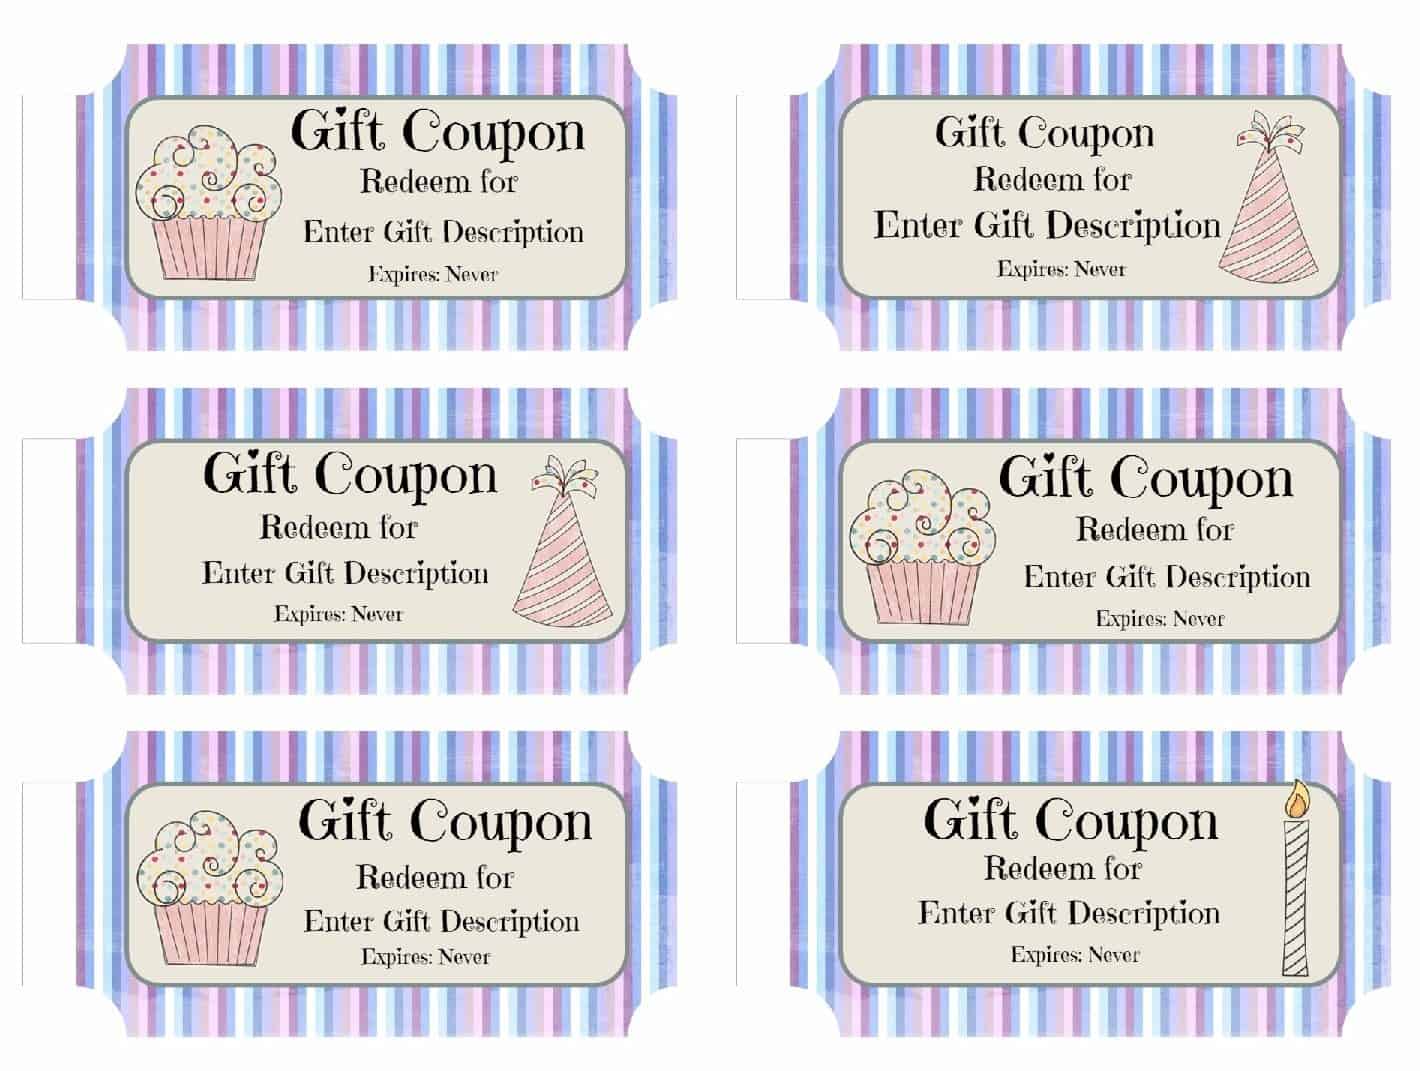 Free Custom Birthday Coupons - Customize Online & Print at Home